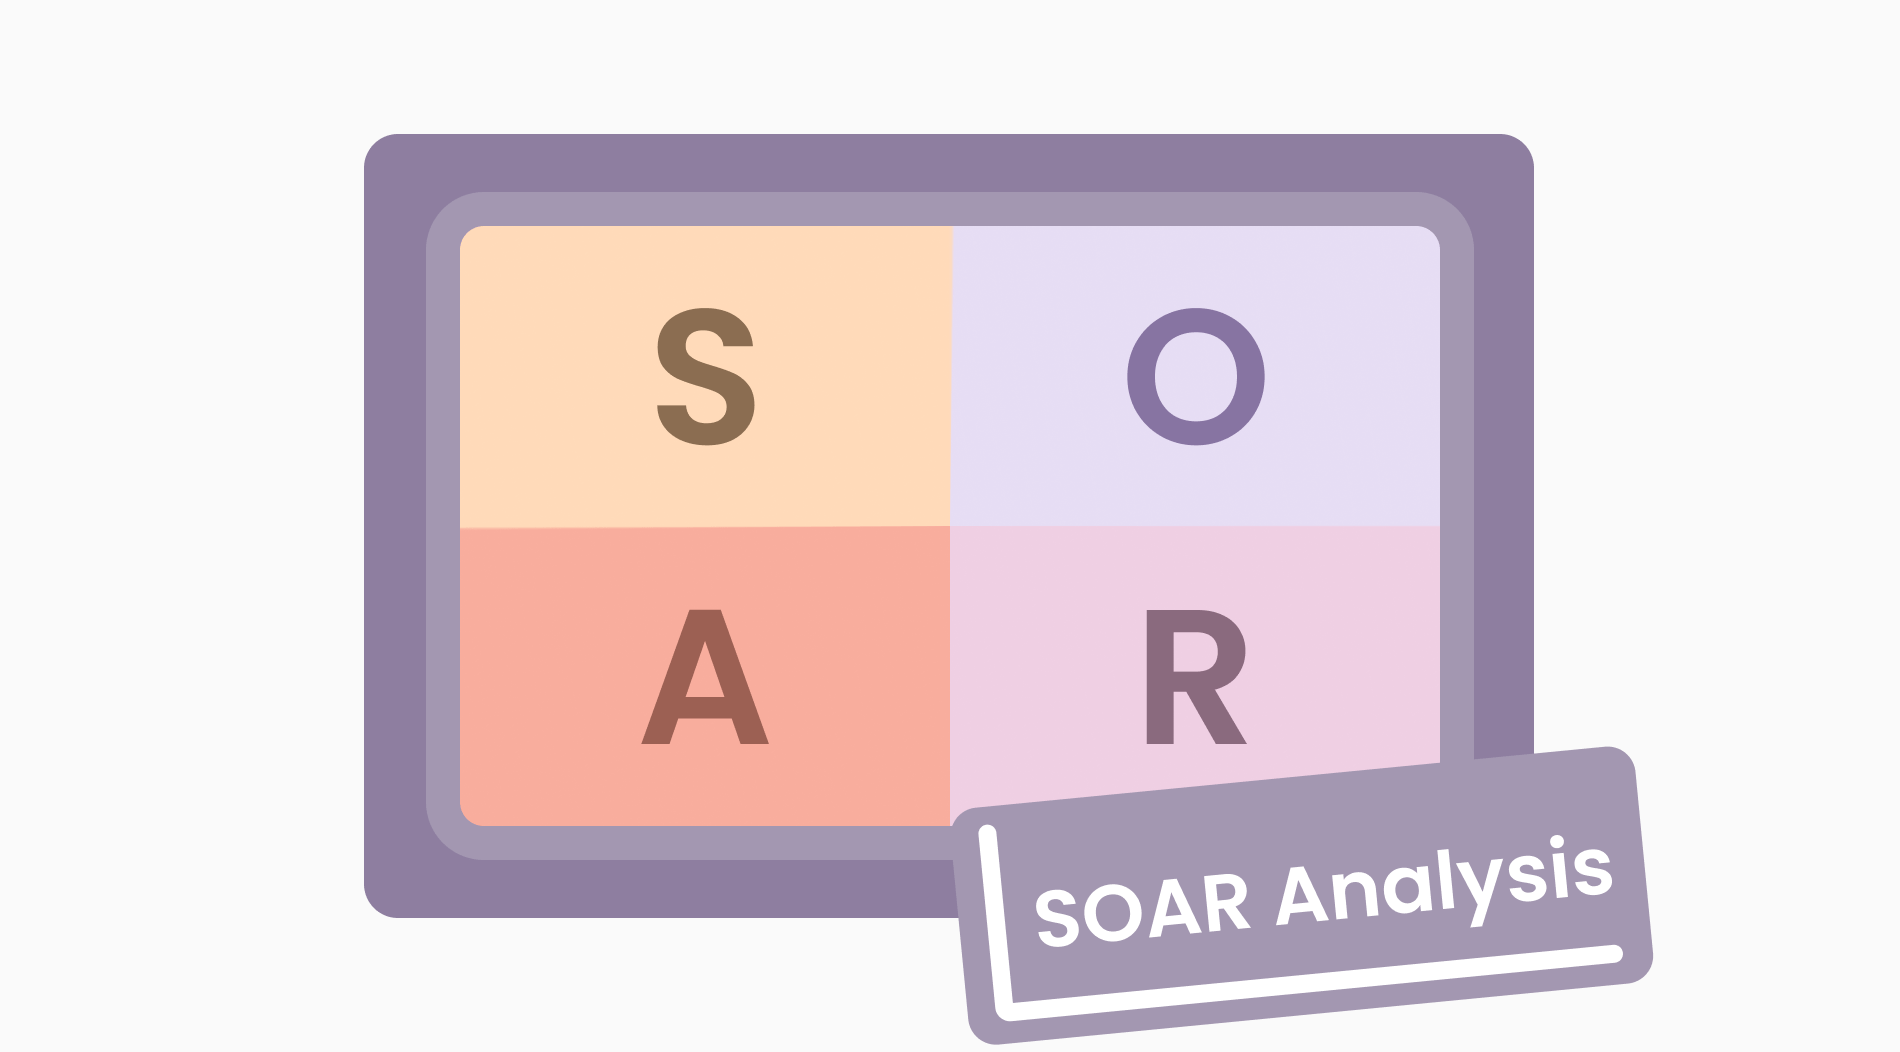 A full guide to the SOAR analysis